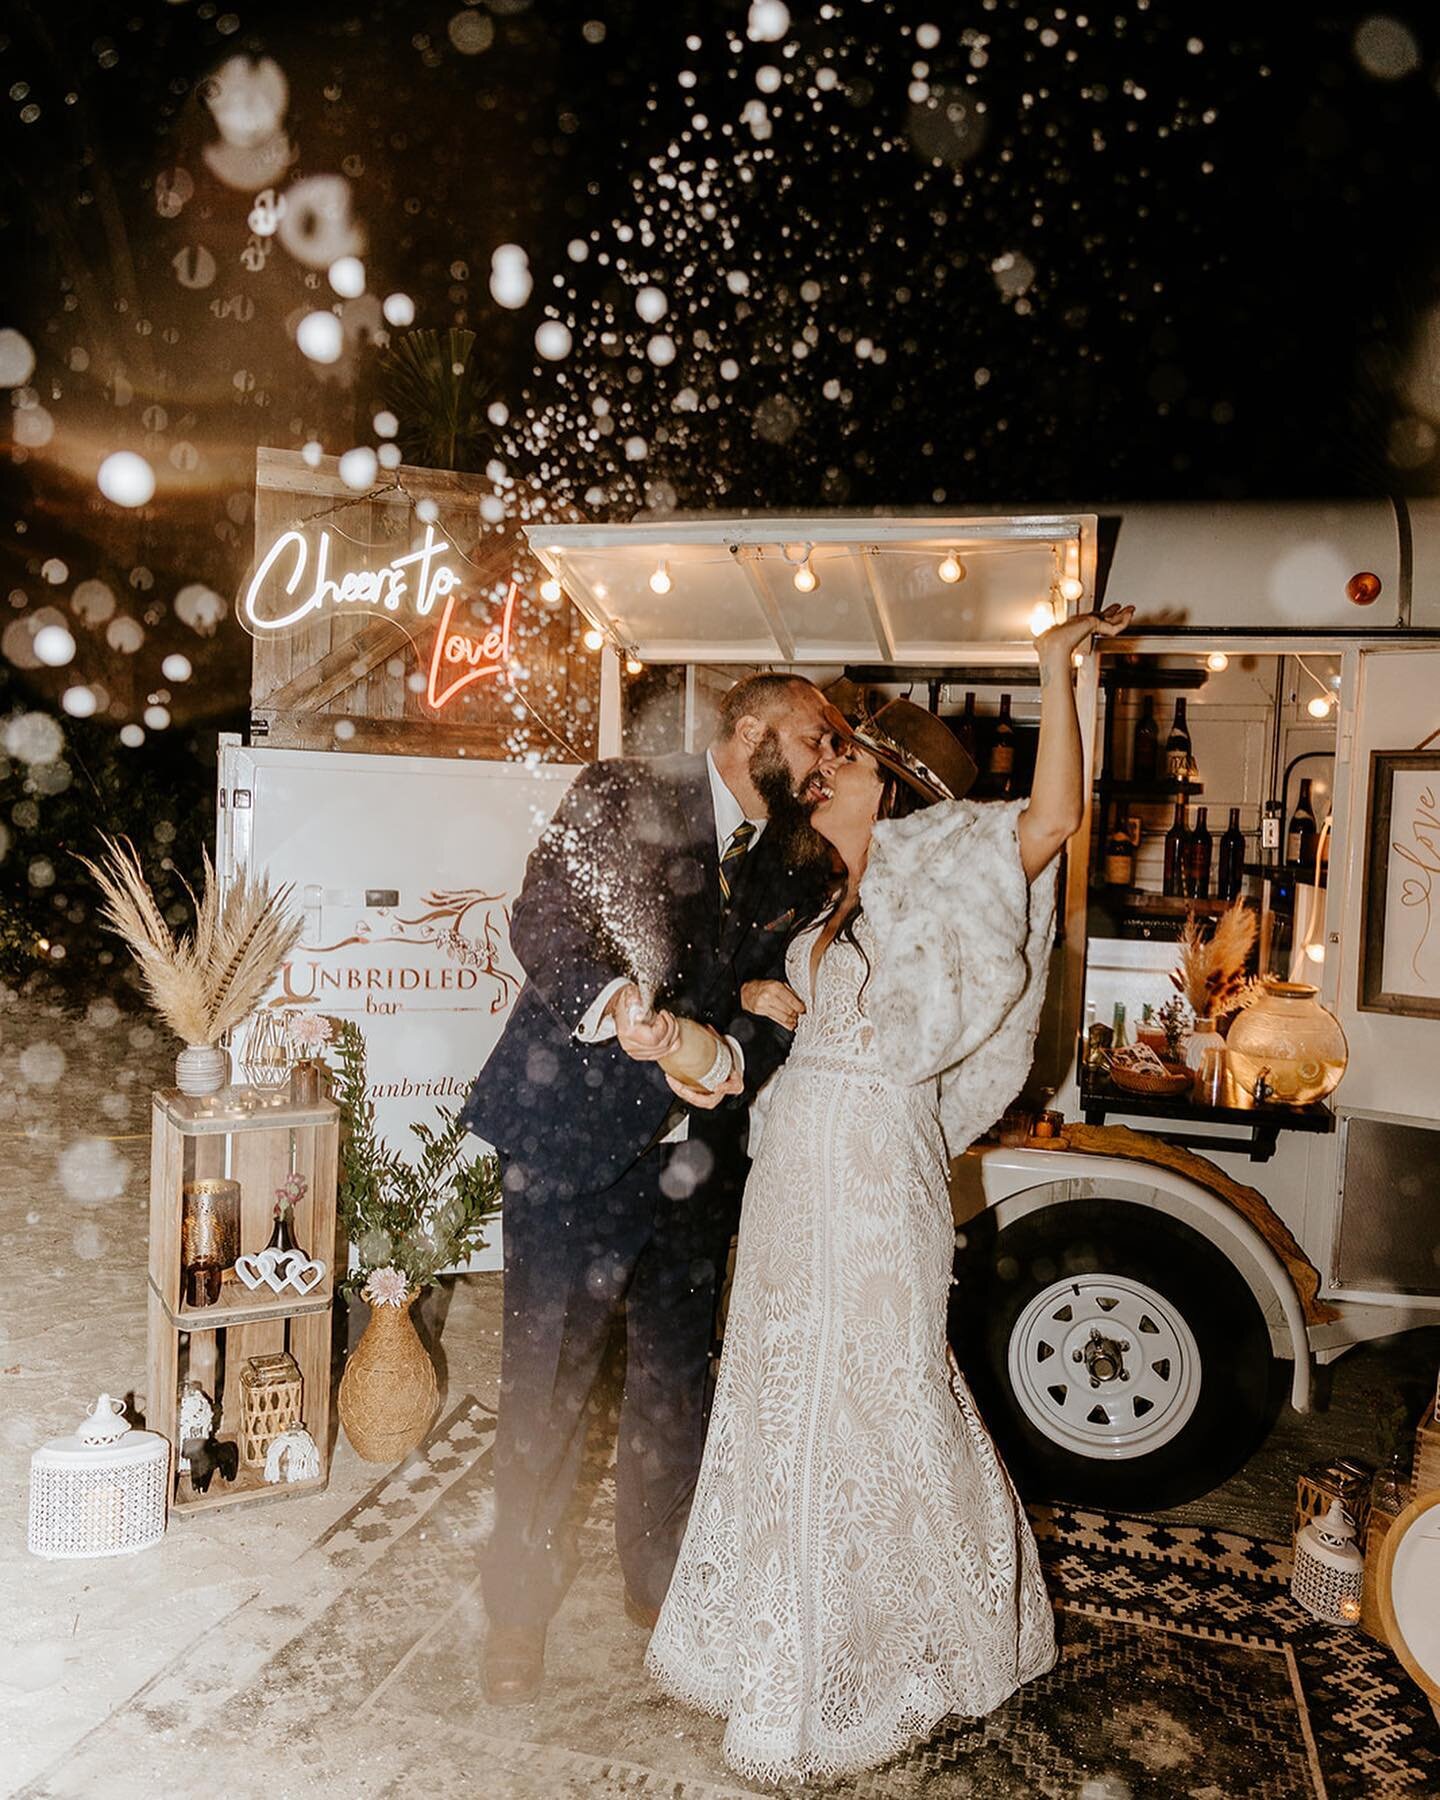 In a world 🌍 
Of boring bars 
We want you 
To be UNBRIDLED 🥂

The BEST mobile bar experience for you and your guests. Our reviews tell our story and we couldn&rsquo;t be more proud 😊

Thanks @jennifercatherinephotography for the EPIC champagne pho